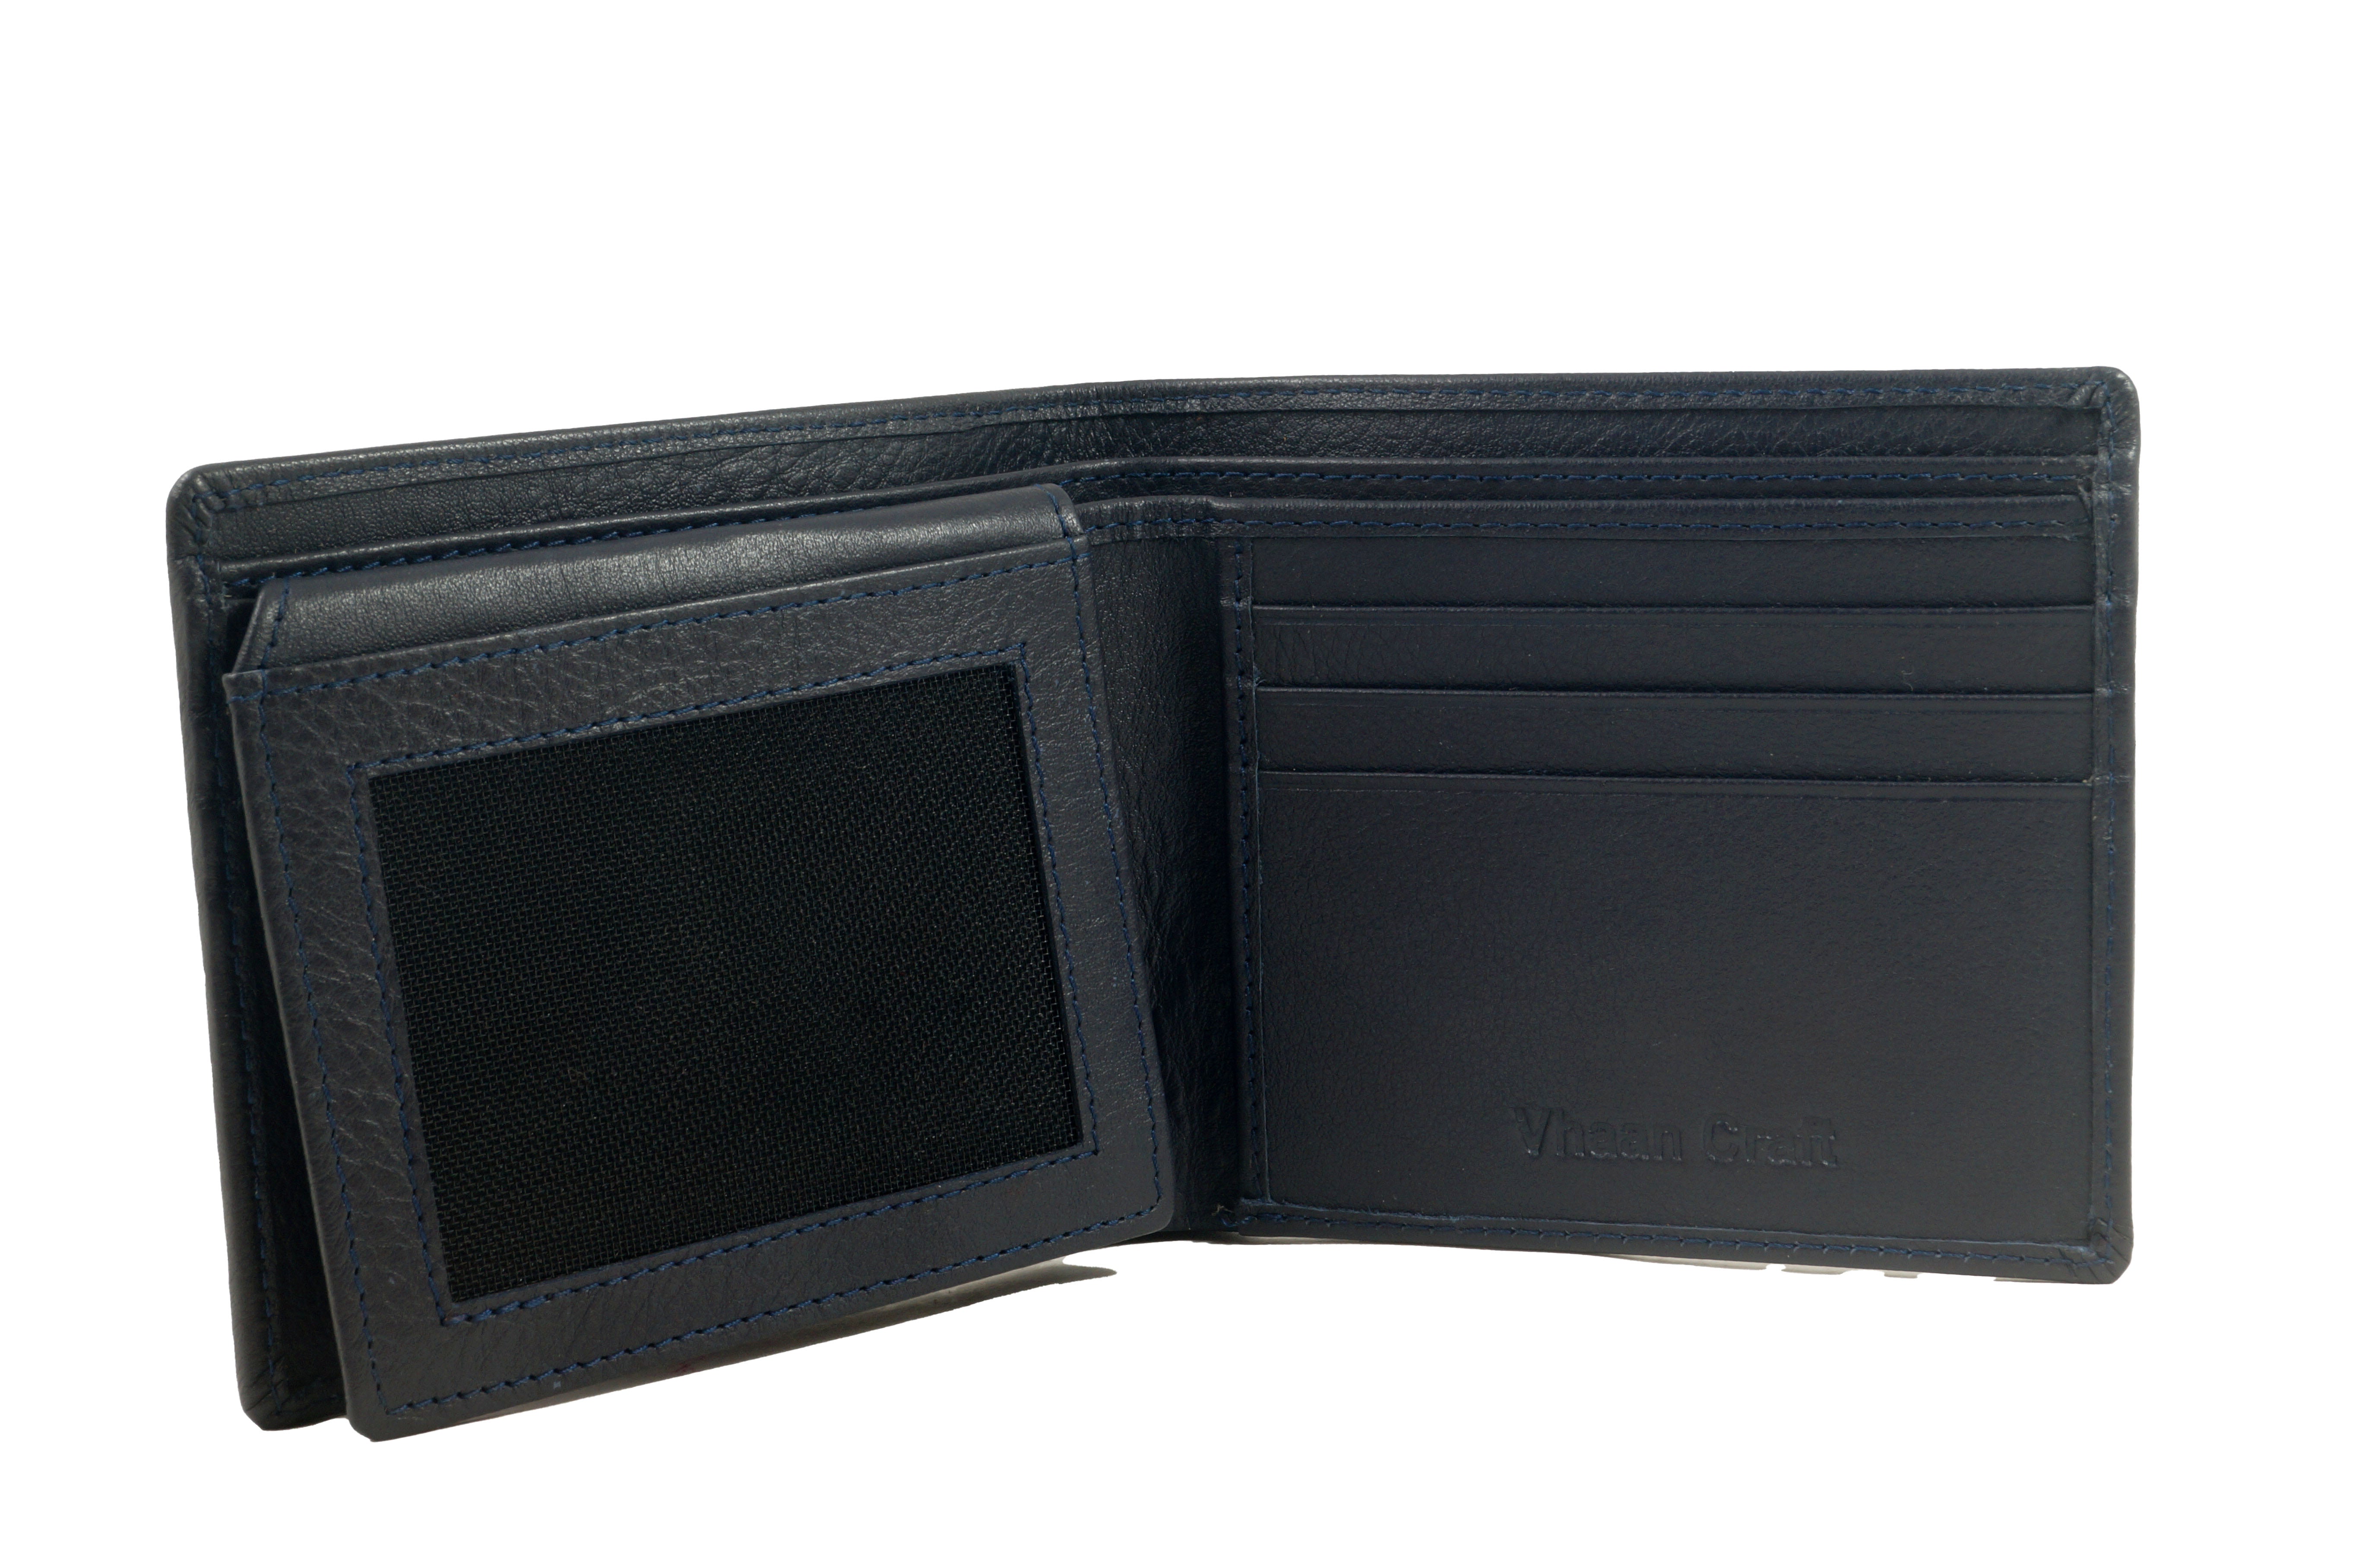 Style Guardian: Premium NAPPA Leather Wallet with RFID Protection for Men - Blue